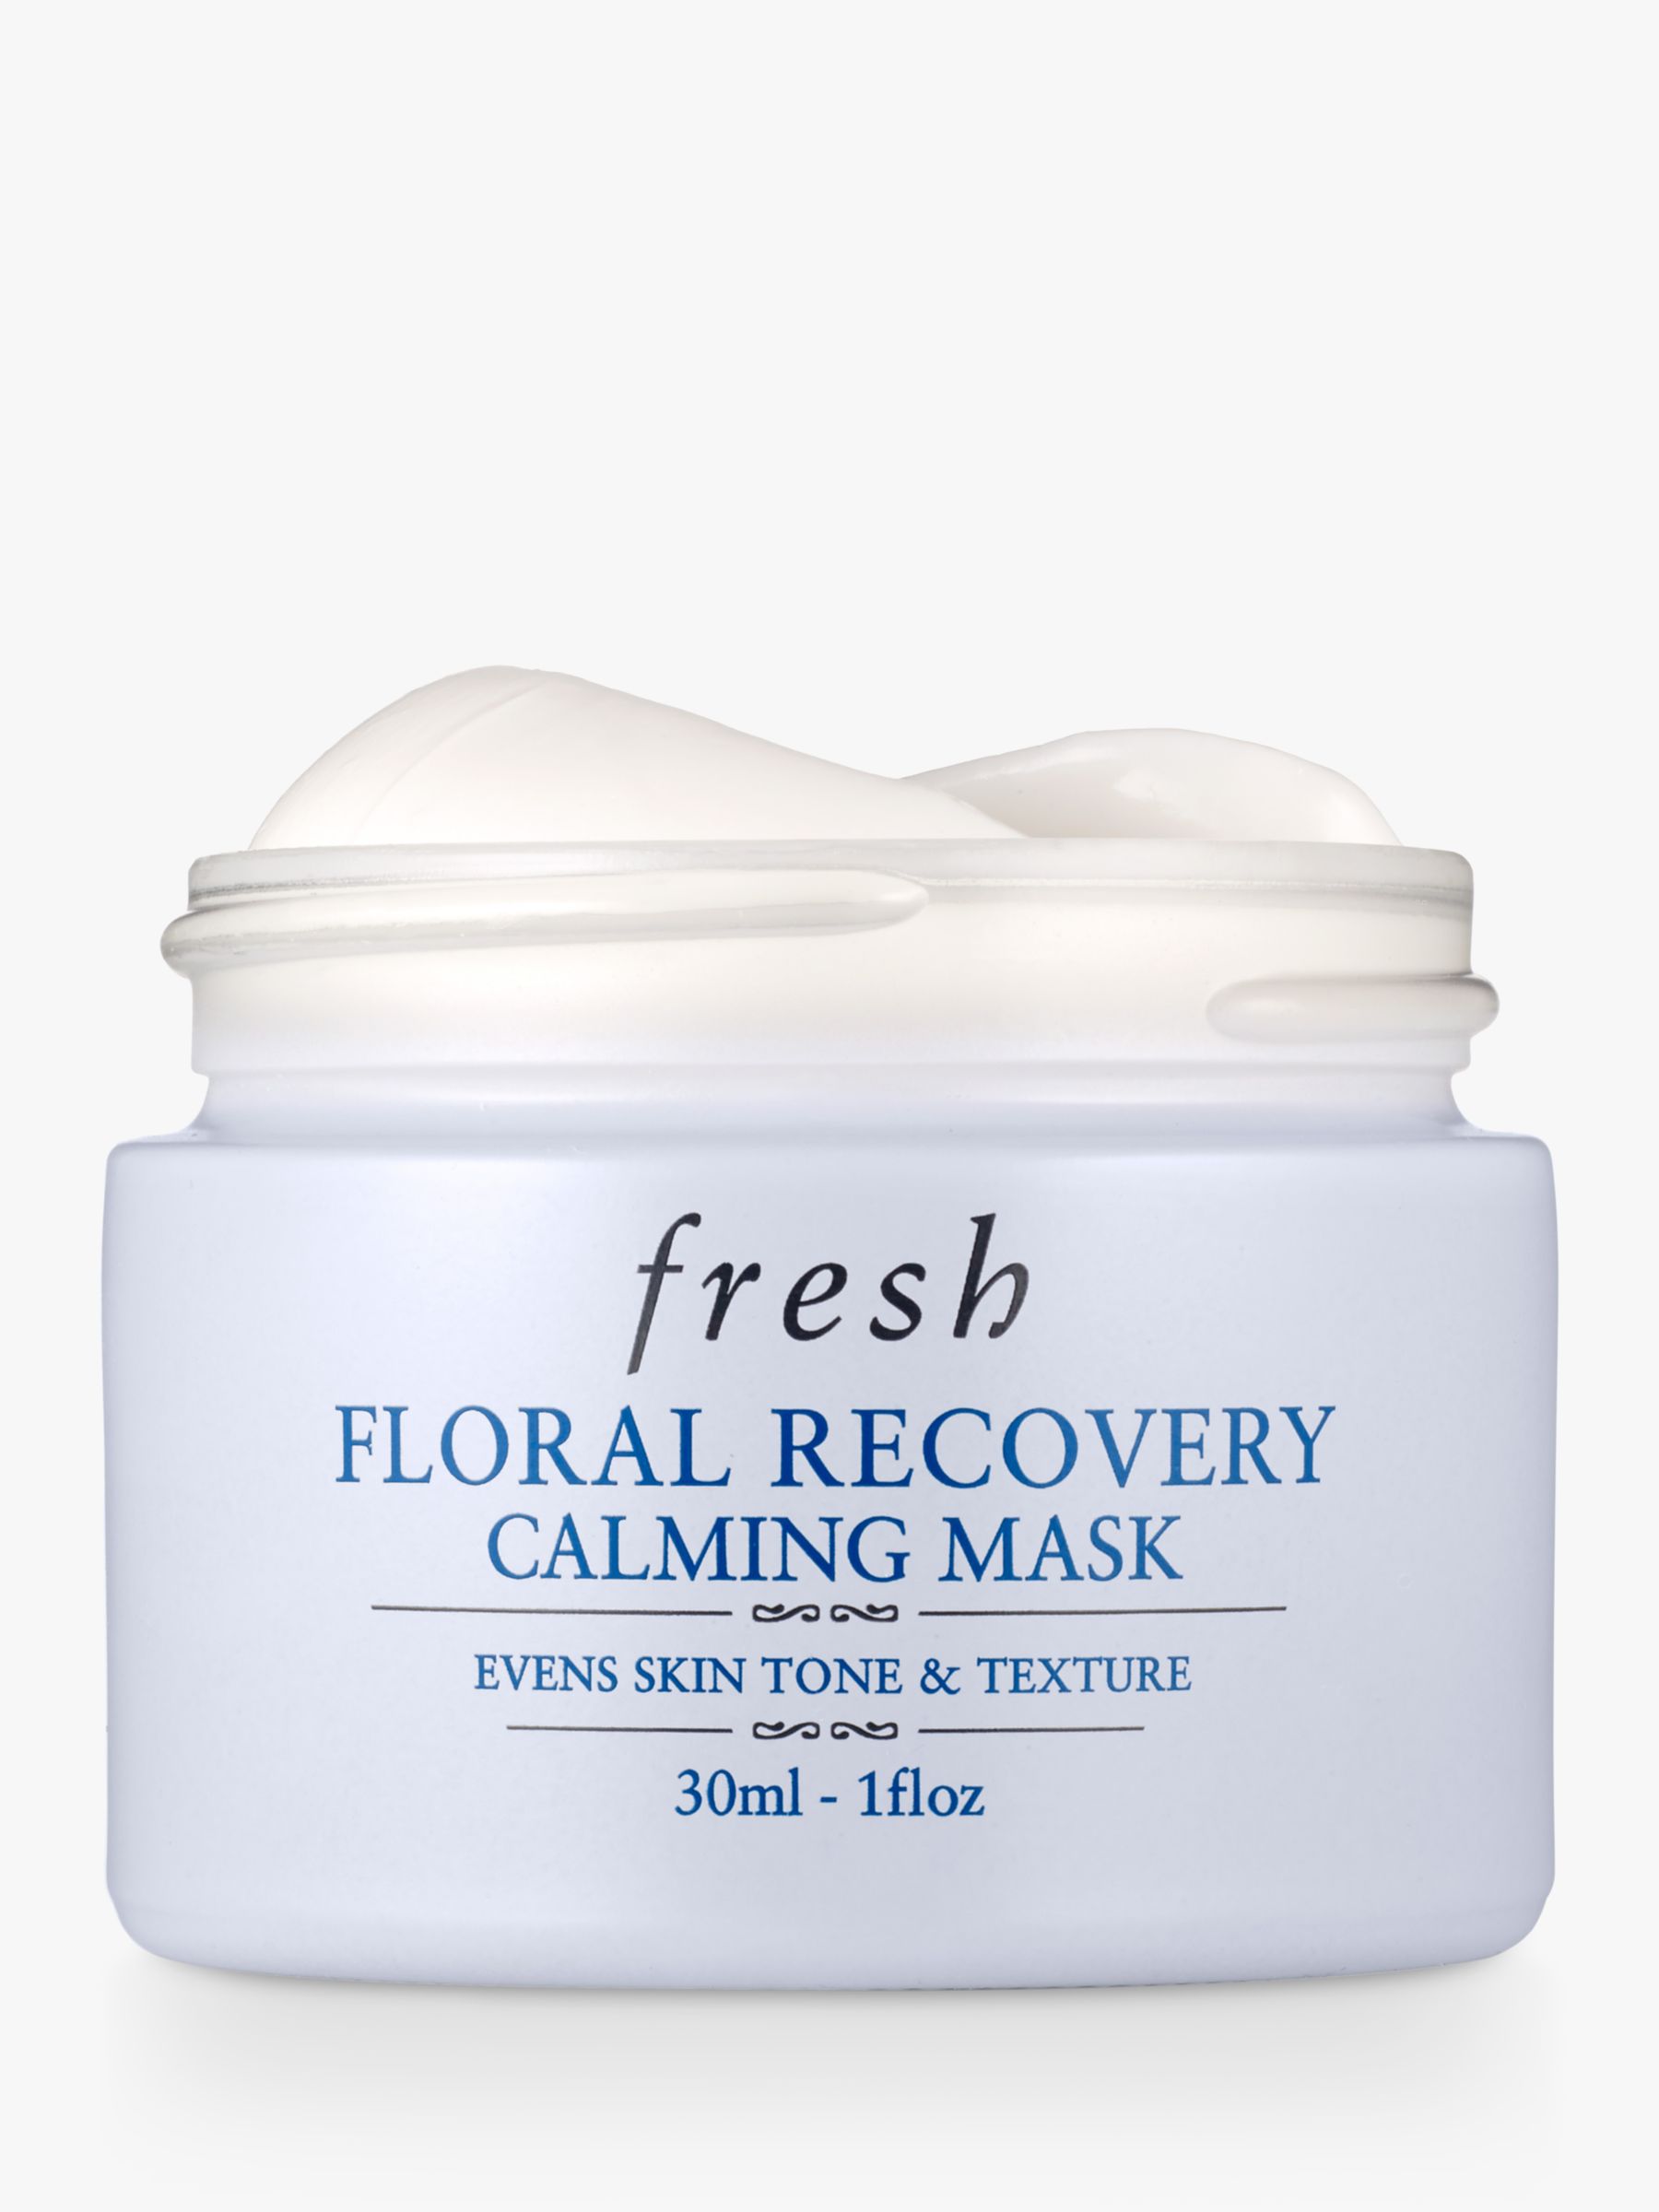 Fresh Floral Recovery Calming Mask, 30ml 2